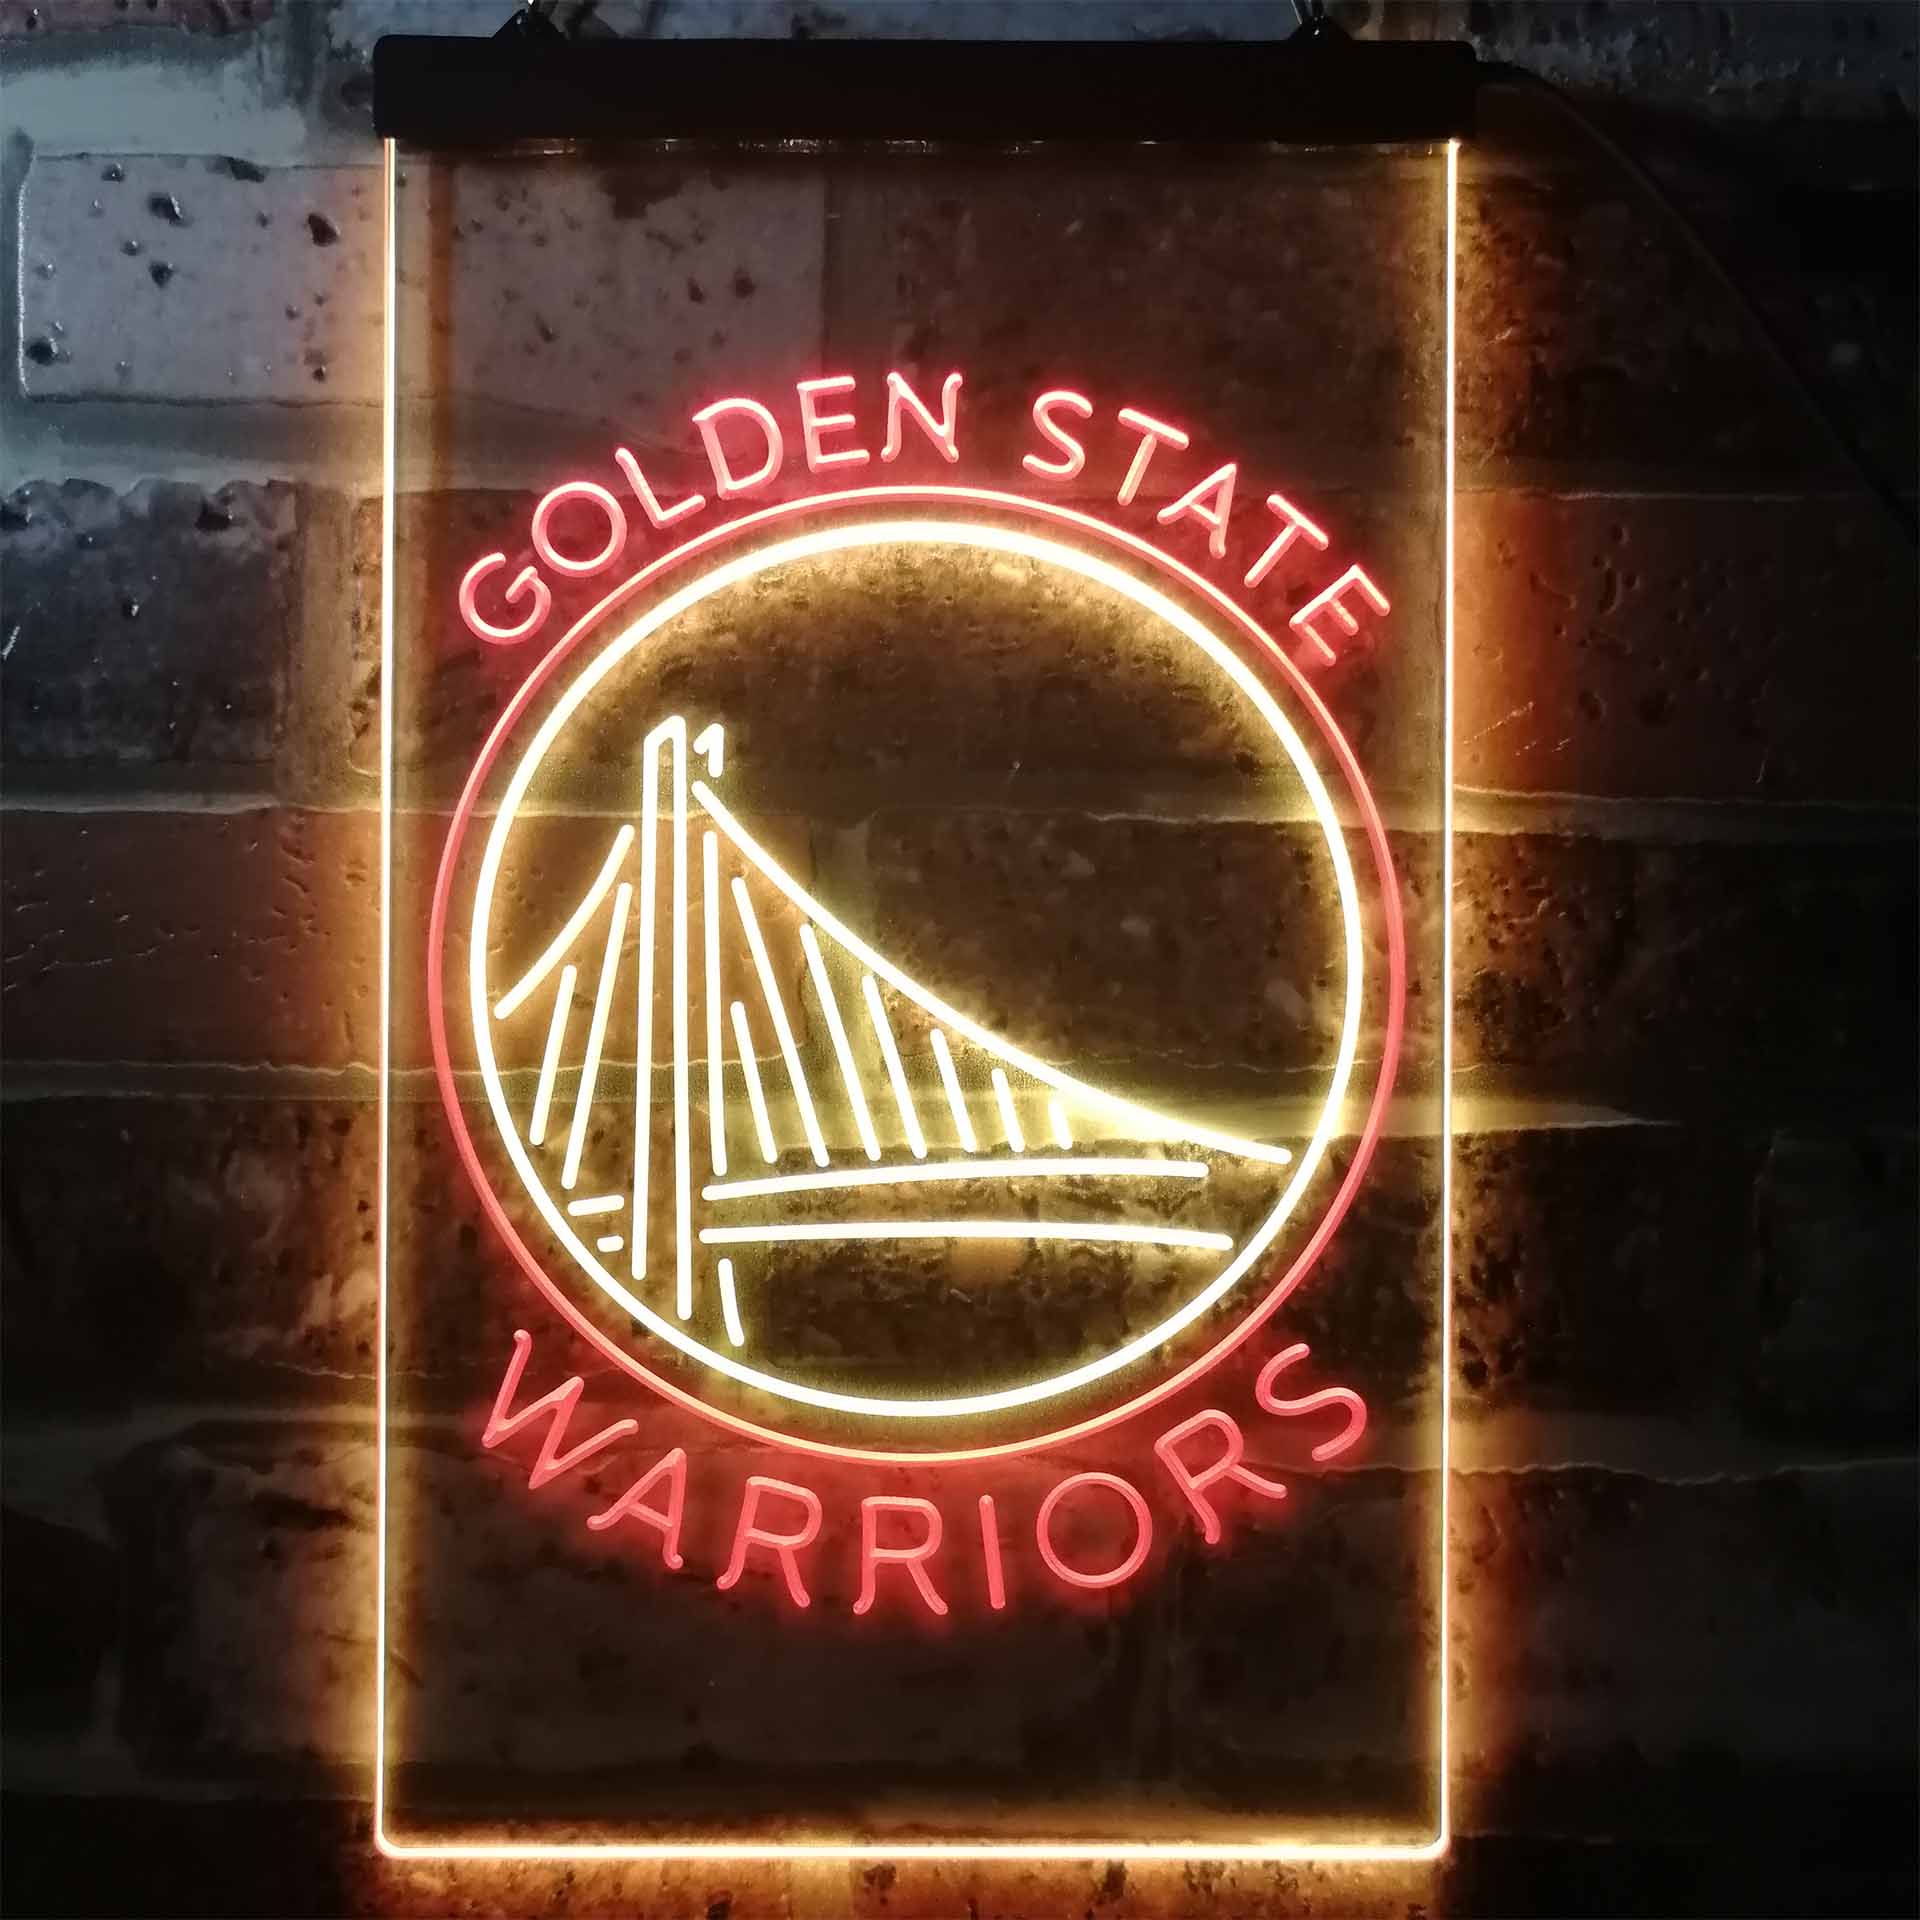 Golden State Warriors Neon LED Sign